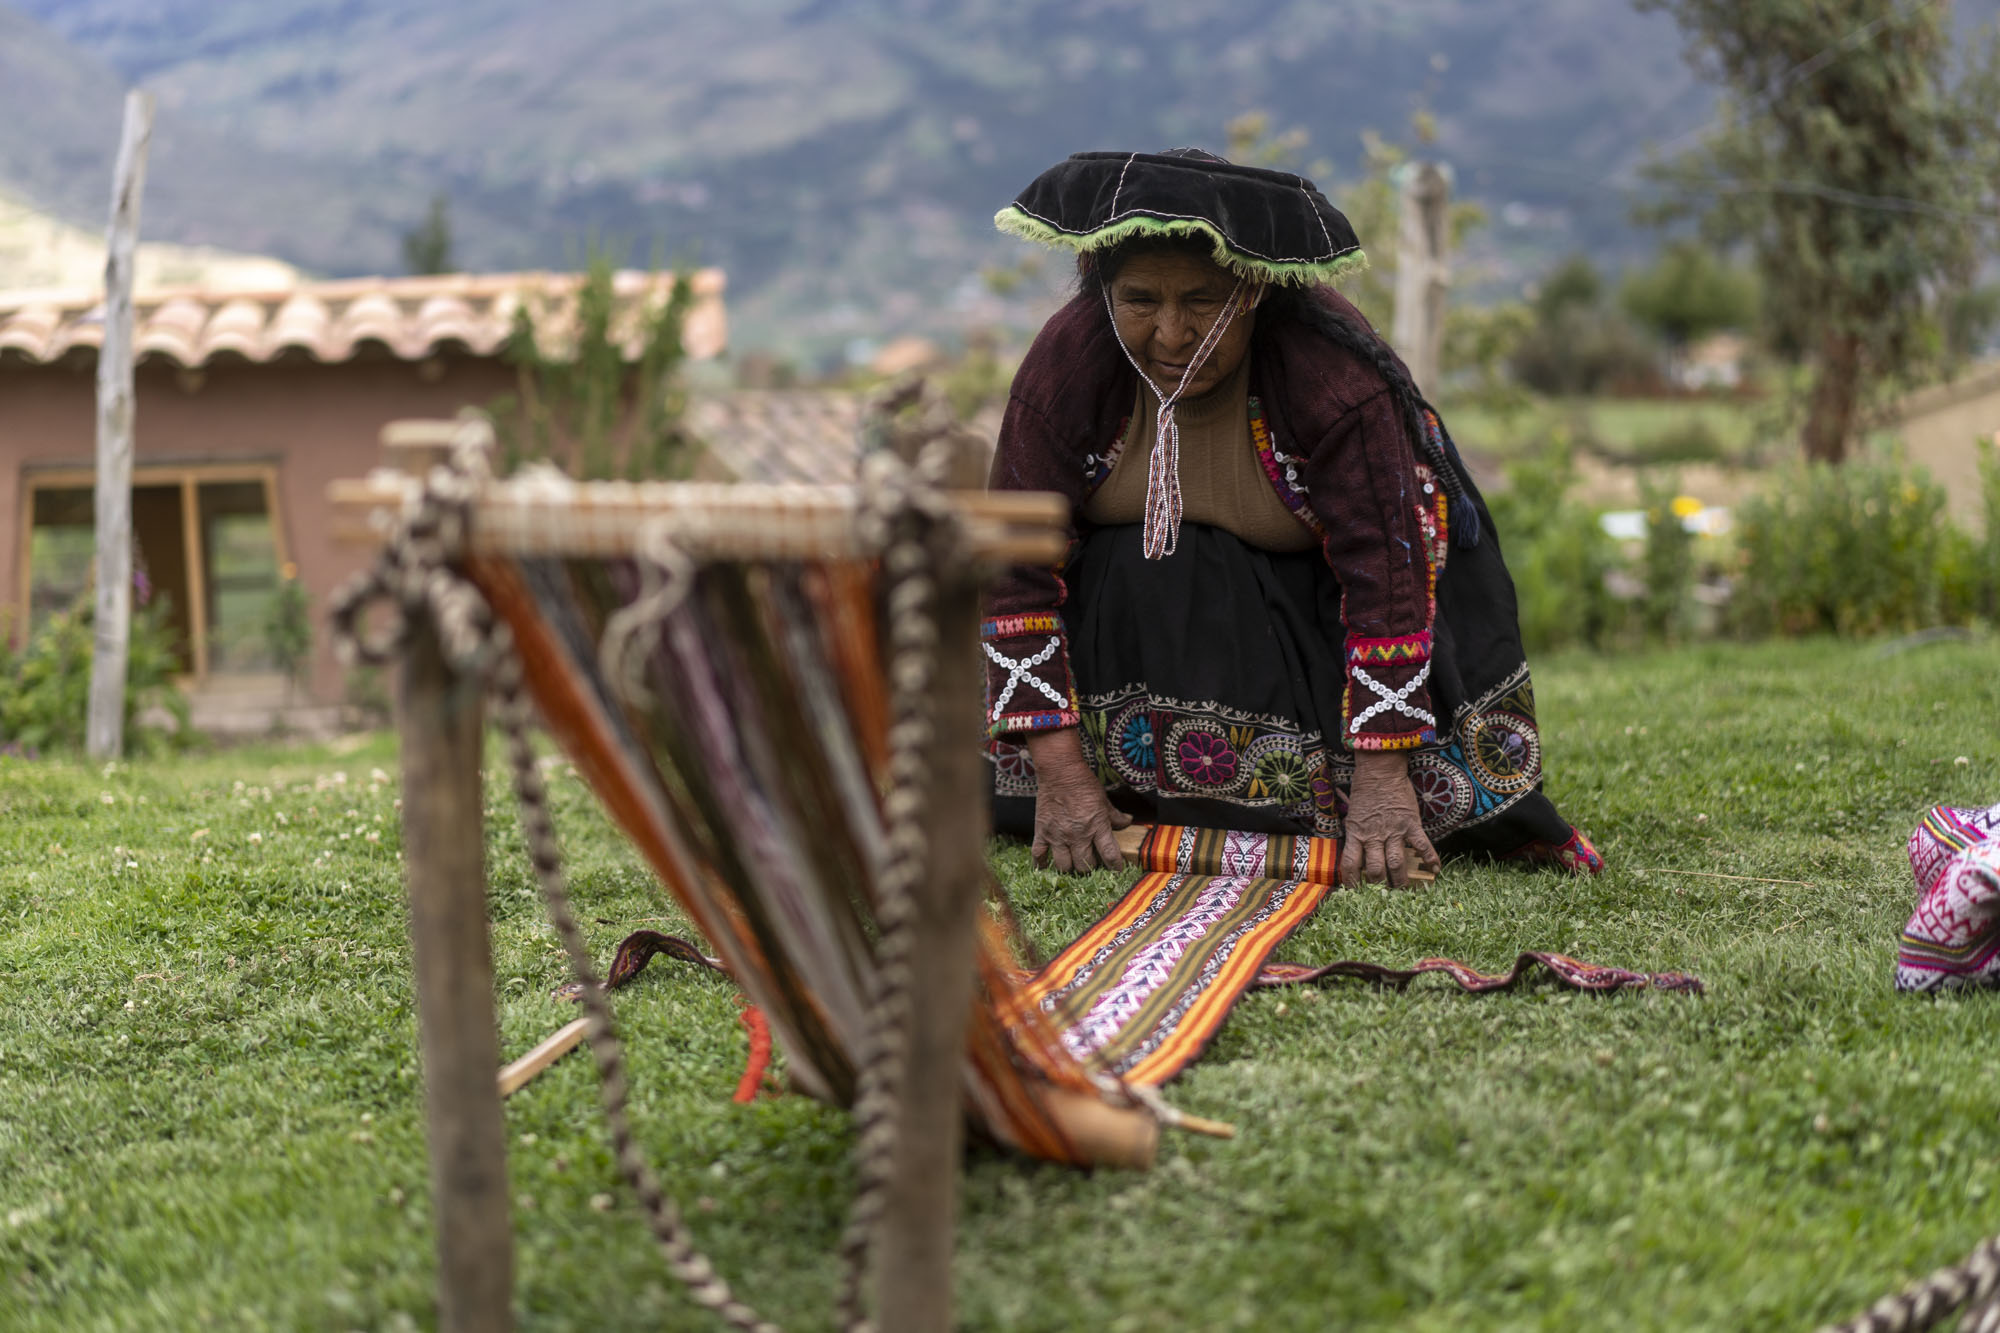 An older Peruvian woman with a broad black hat unrolls her tapestry on the ground in front of the Peruvian Andes mountains.